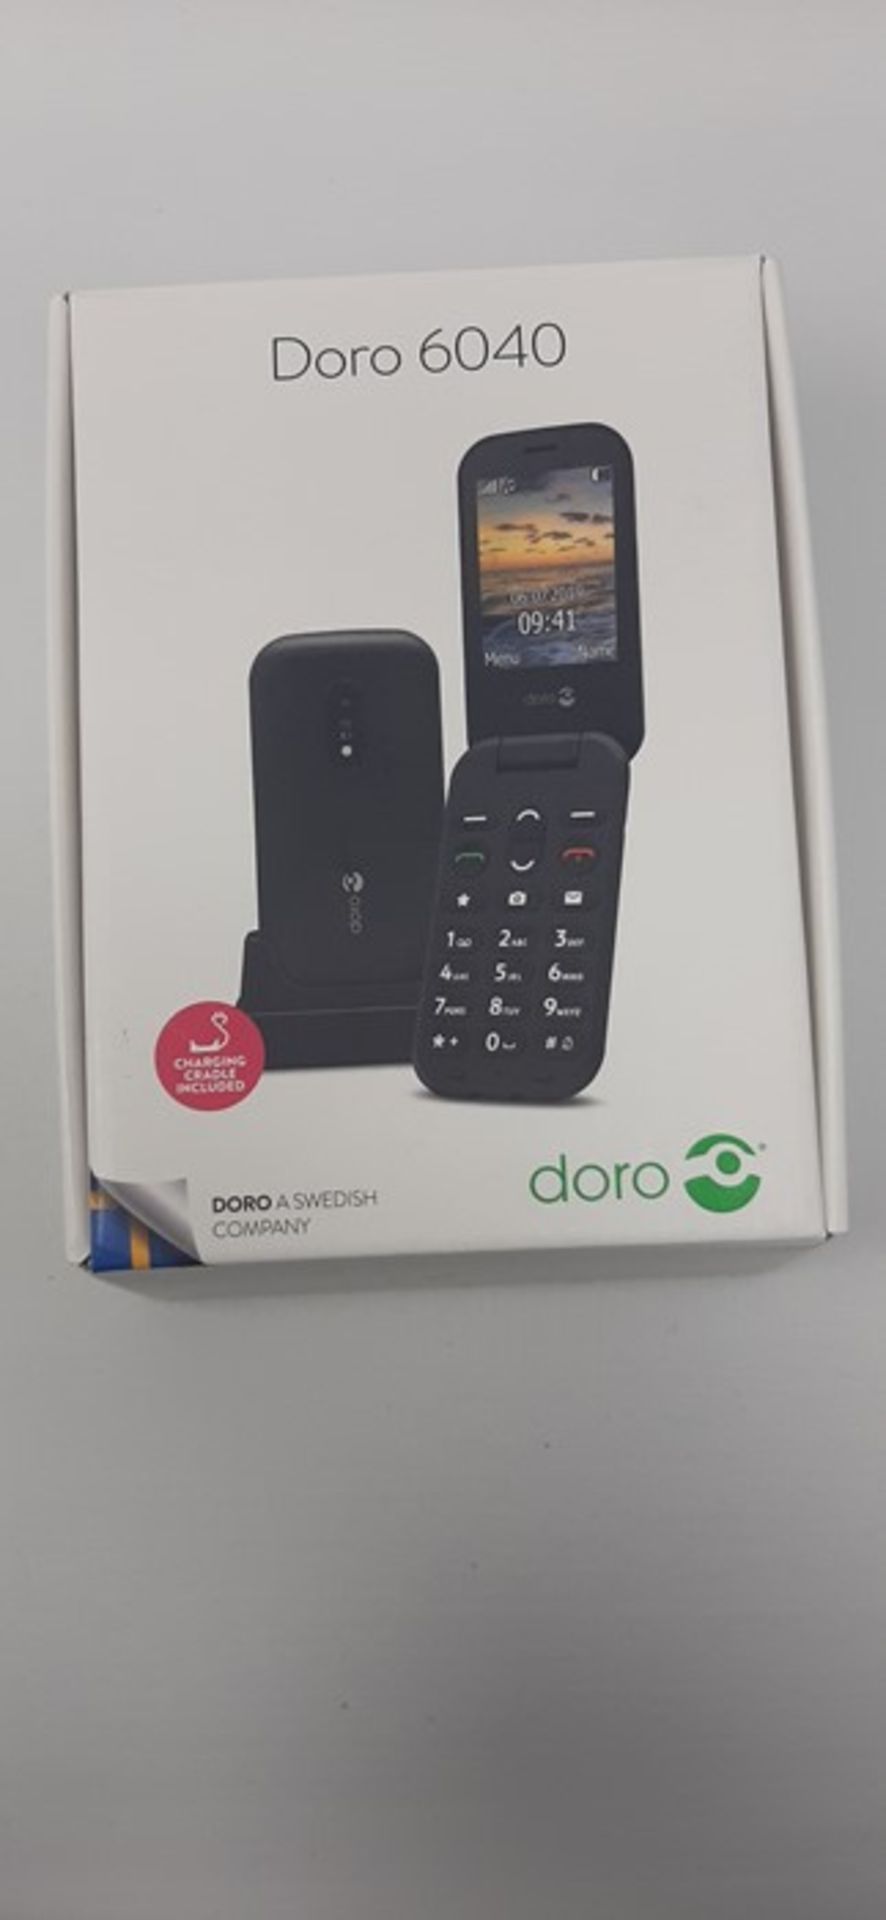 Doro 6040 Unlocked 2G Dual SIM Clamshell Big Button Mobile Phone for Seniors with 2.8" Screen, - Image 2 of 2